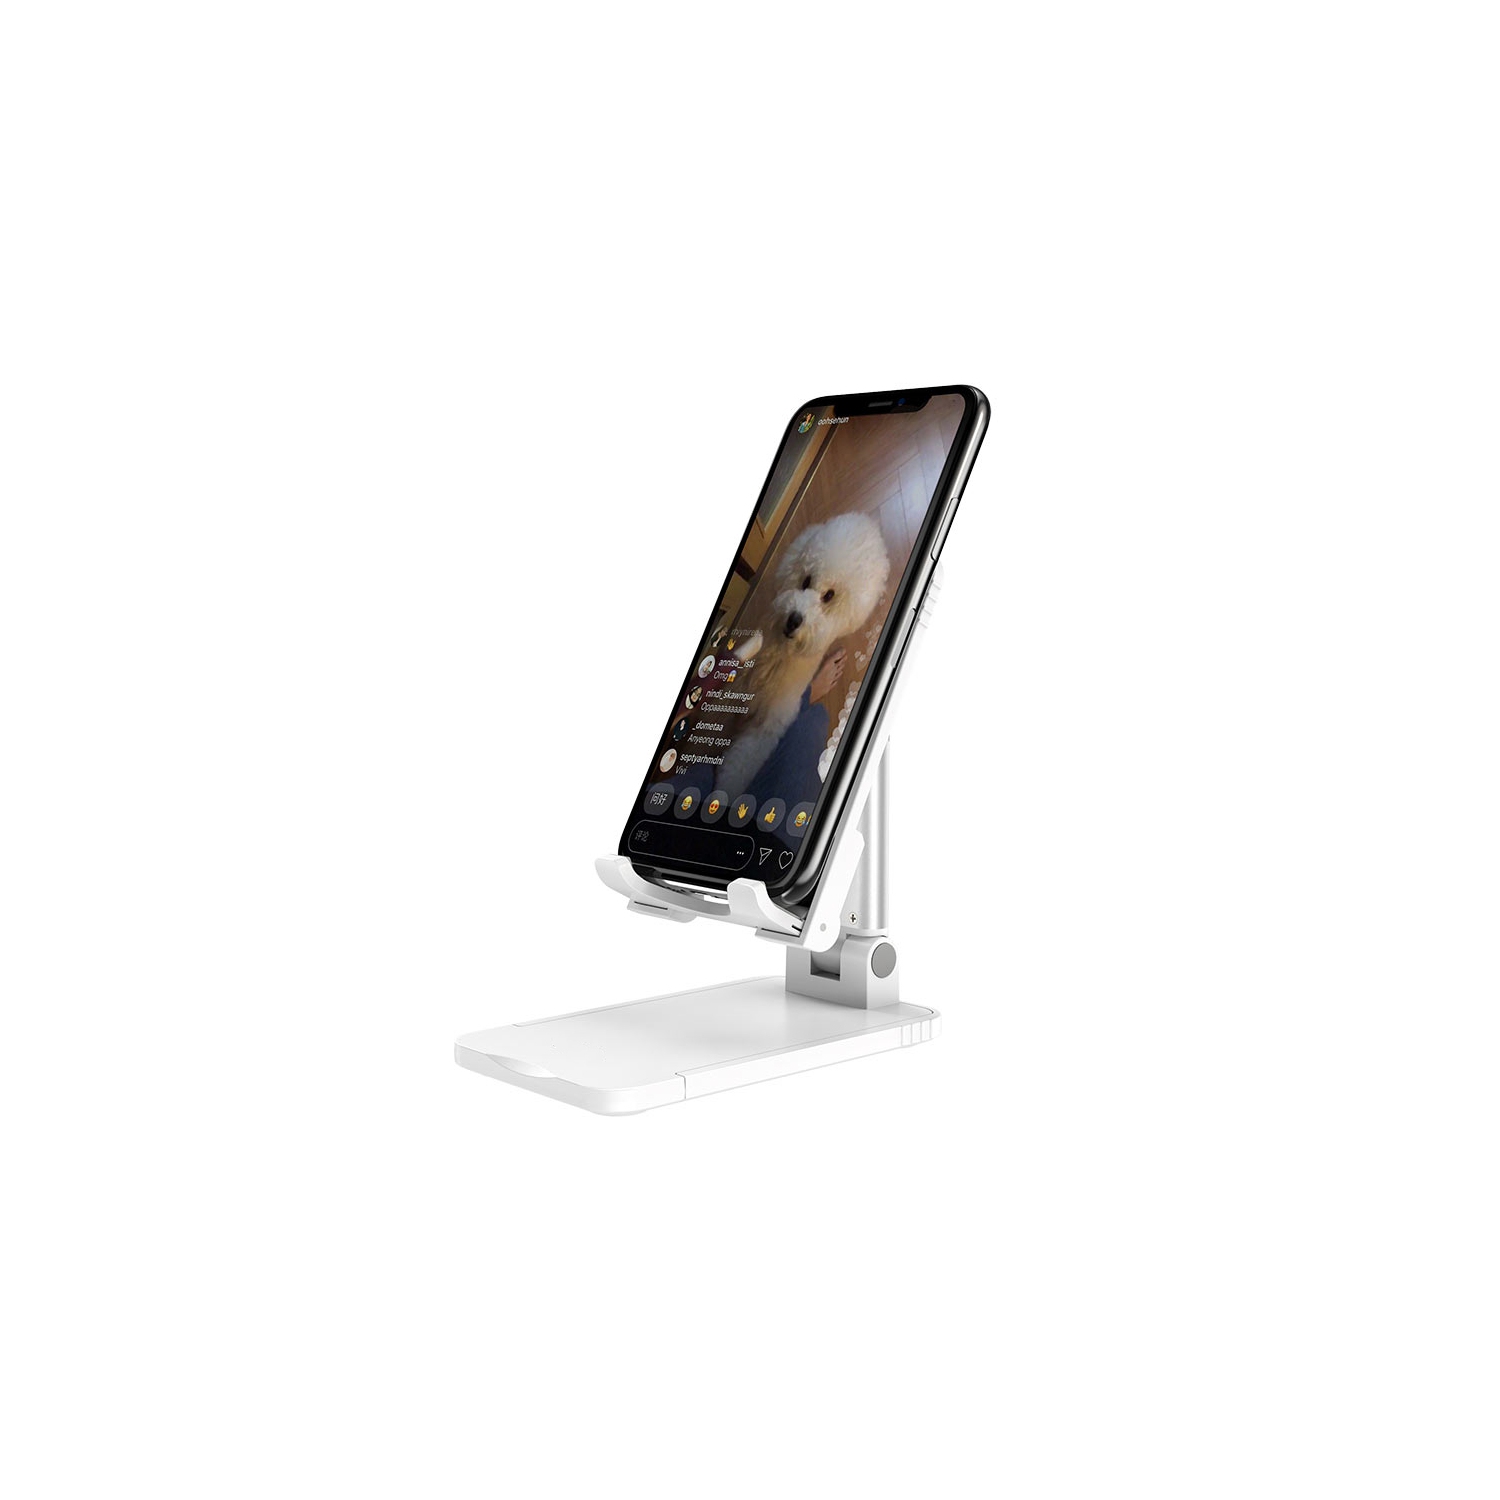 【CSmart】 360 Rotating Tablet Desk Stand Flexible Cellphone Holder Mount for iPhone / iPad / Samsung Tablet / Smartphone, White